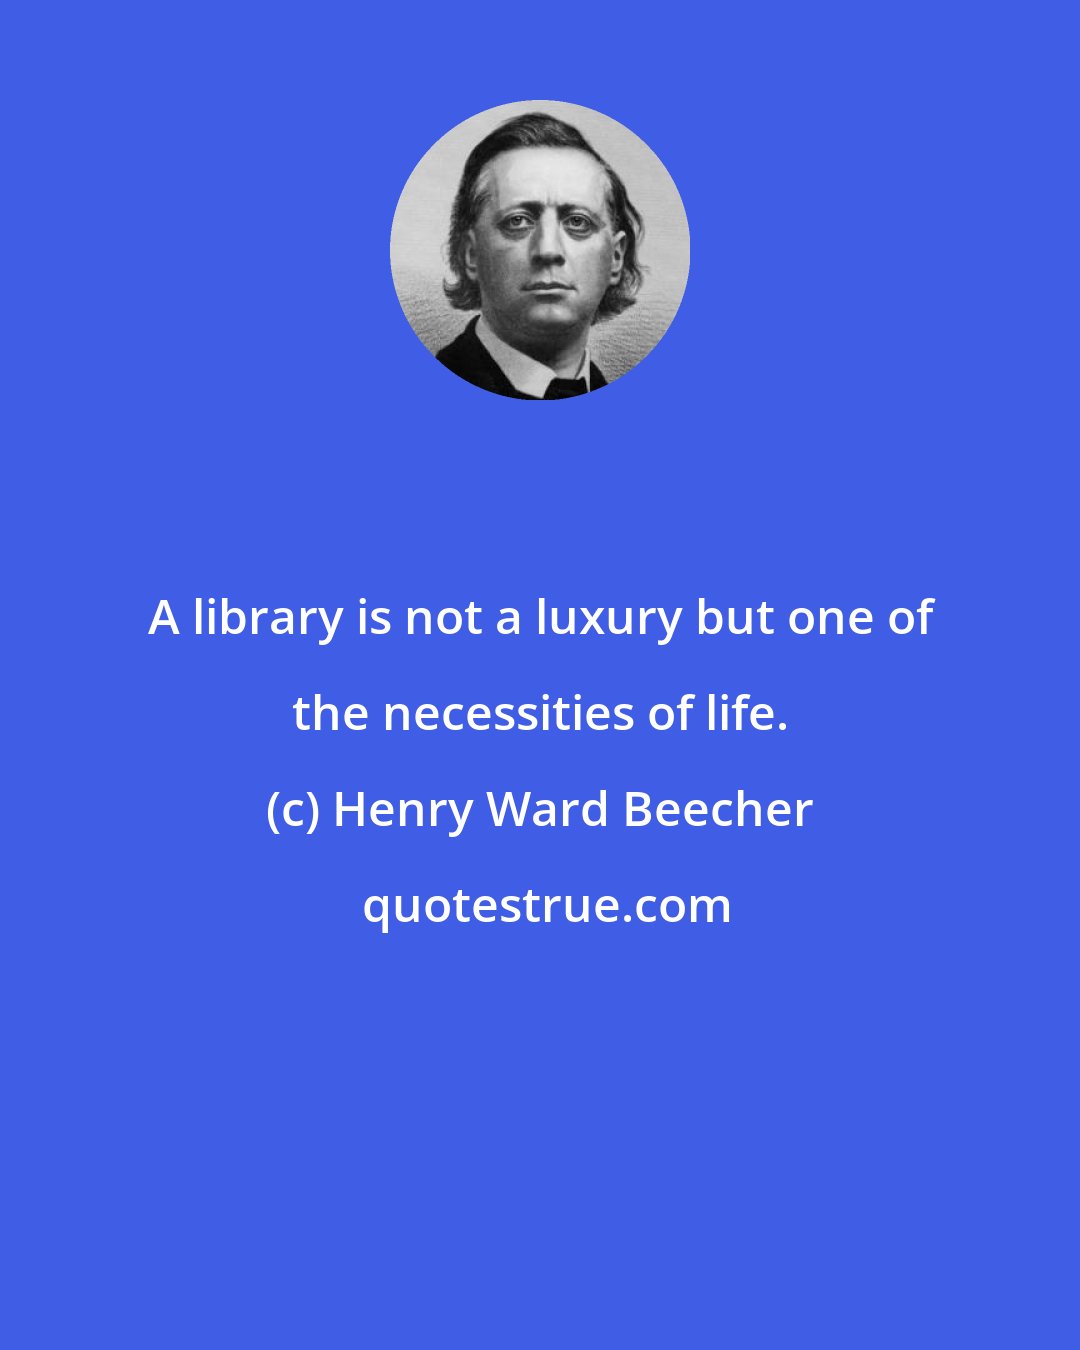 Henry Ward Beecher: A library is not a luxury but one of the necessities of life.